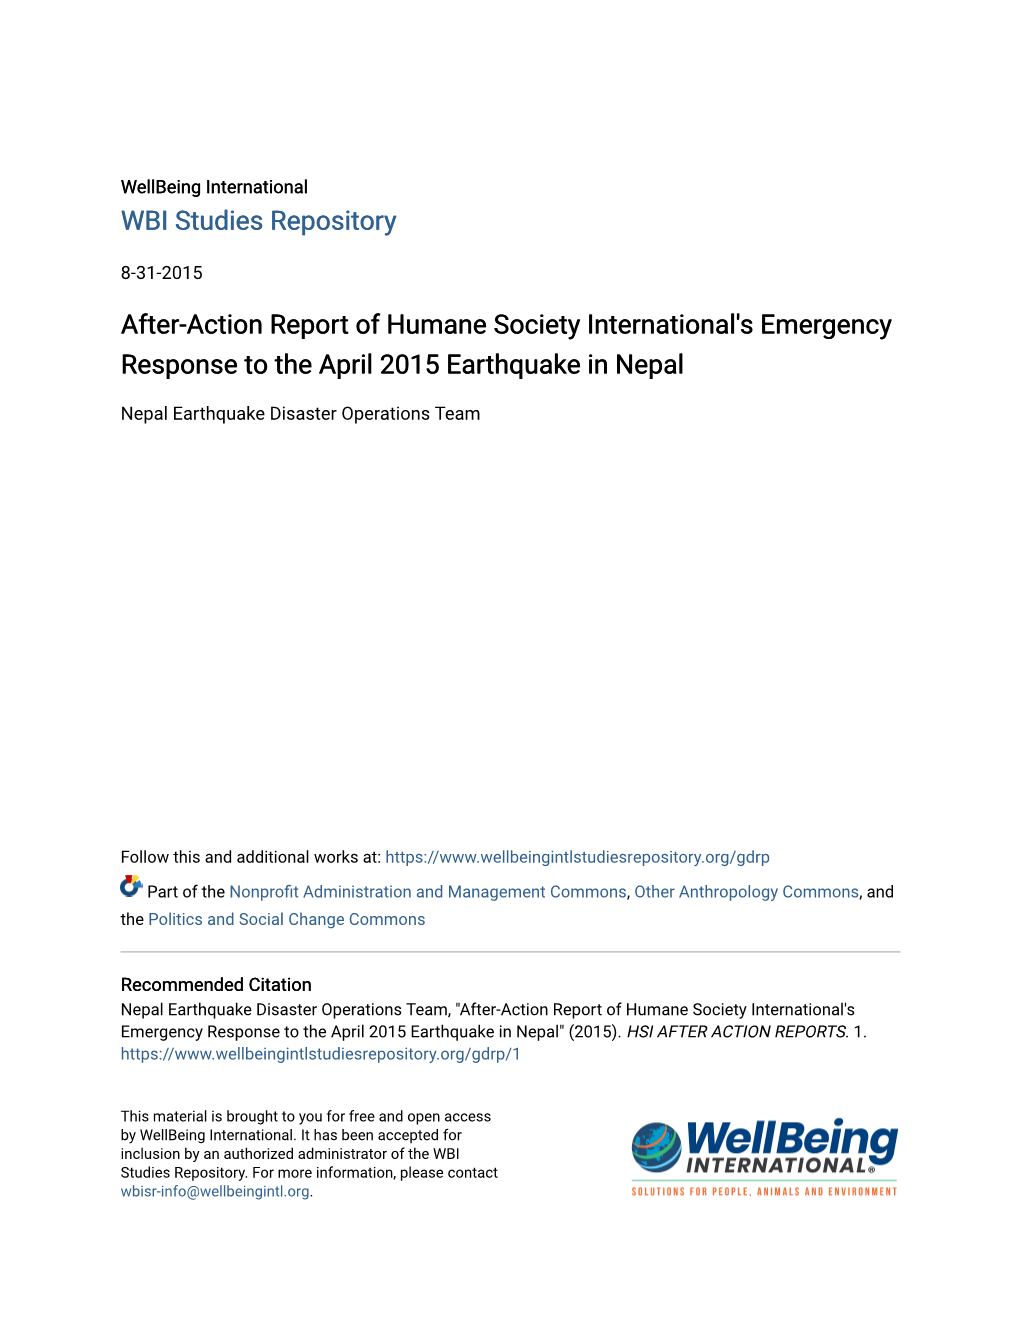 After-Action Report of Humane Society International's Emergency Response to the April 2015 Earthquake in Nepal